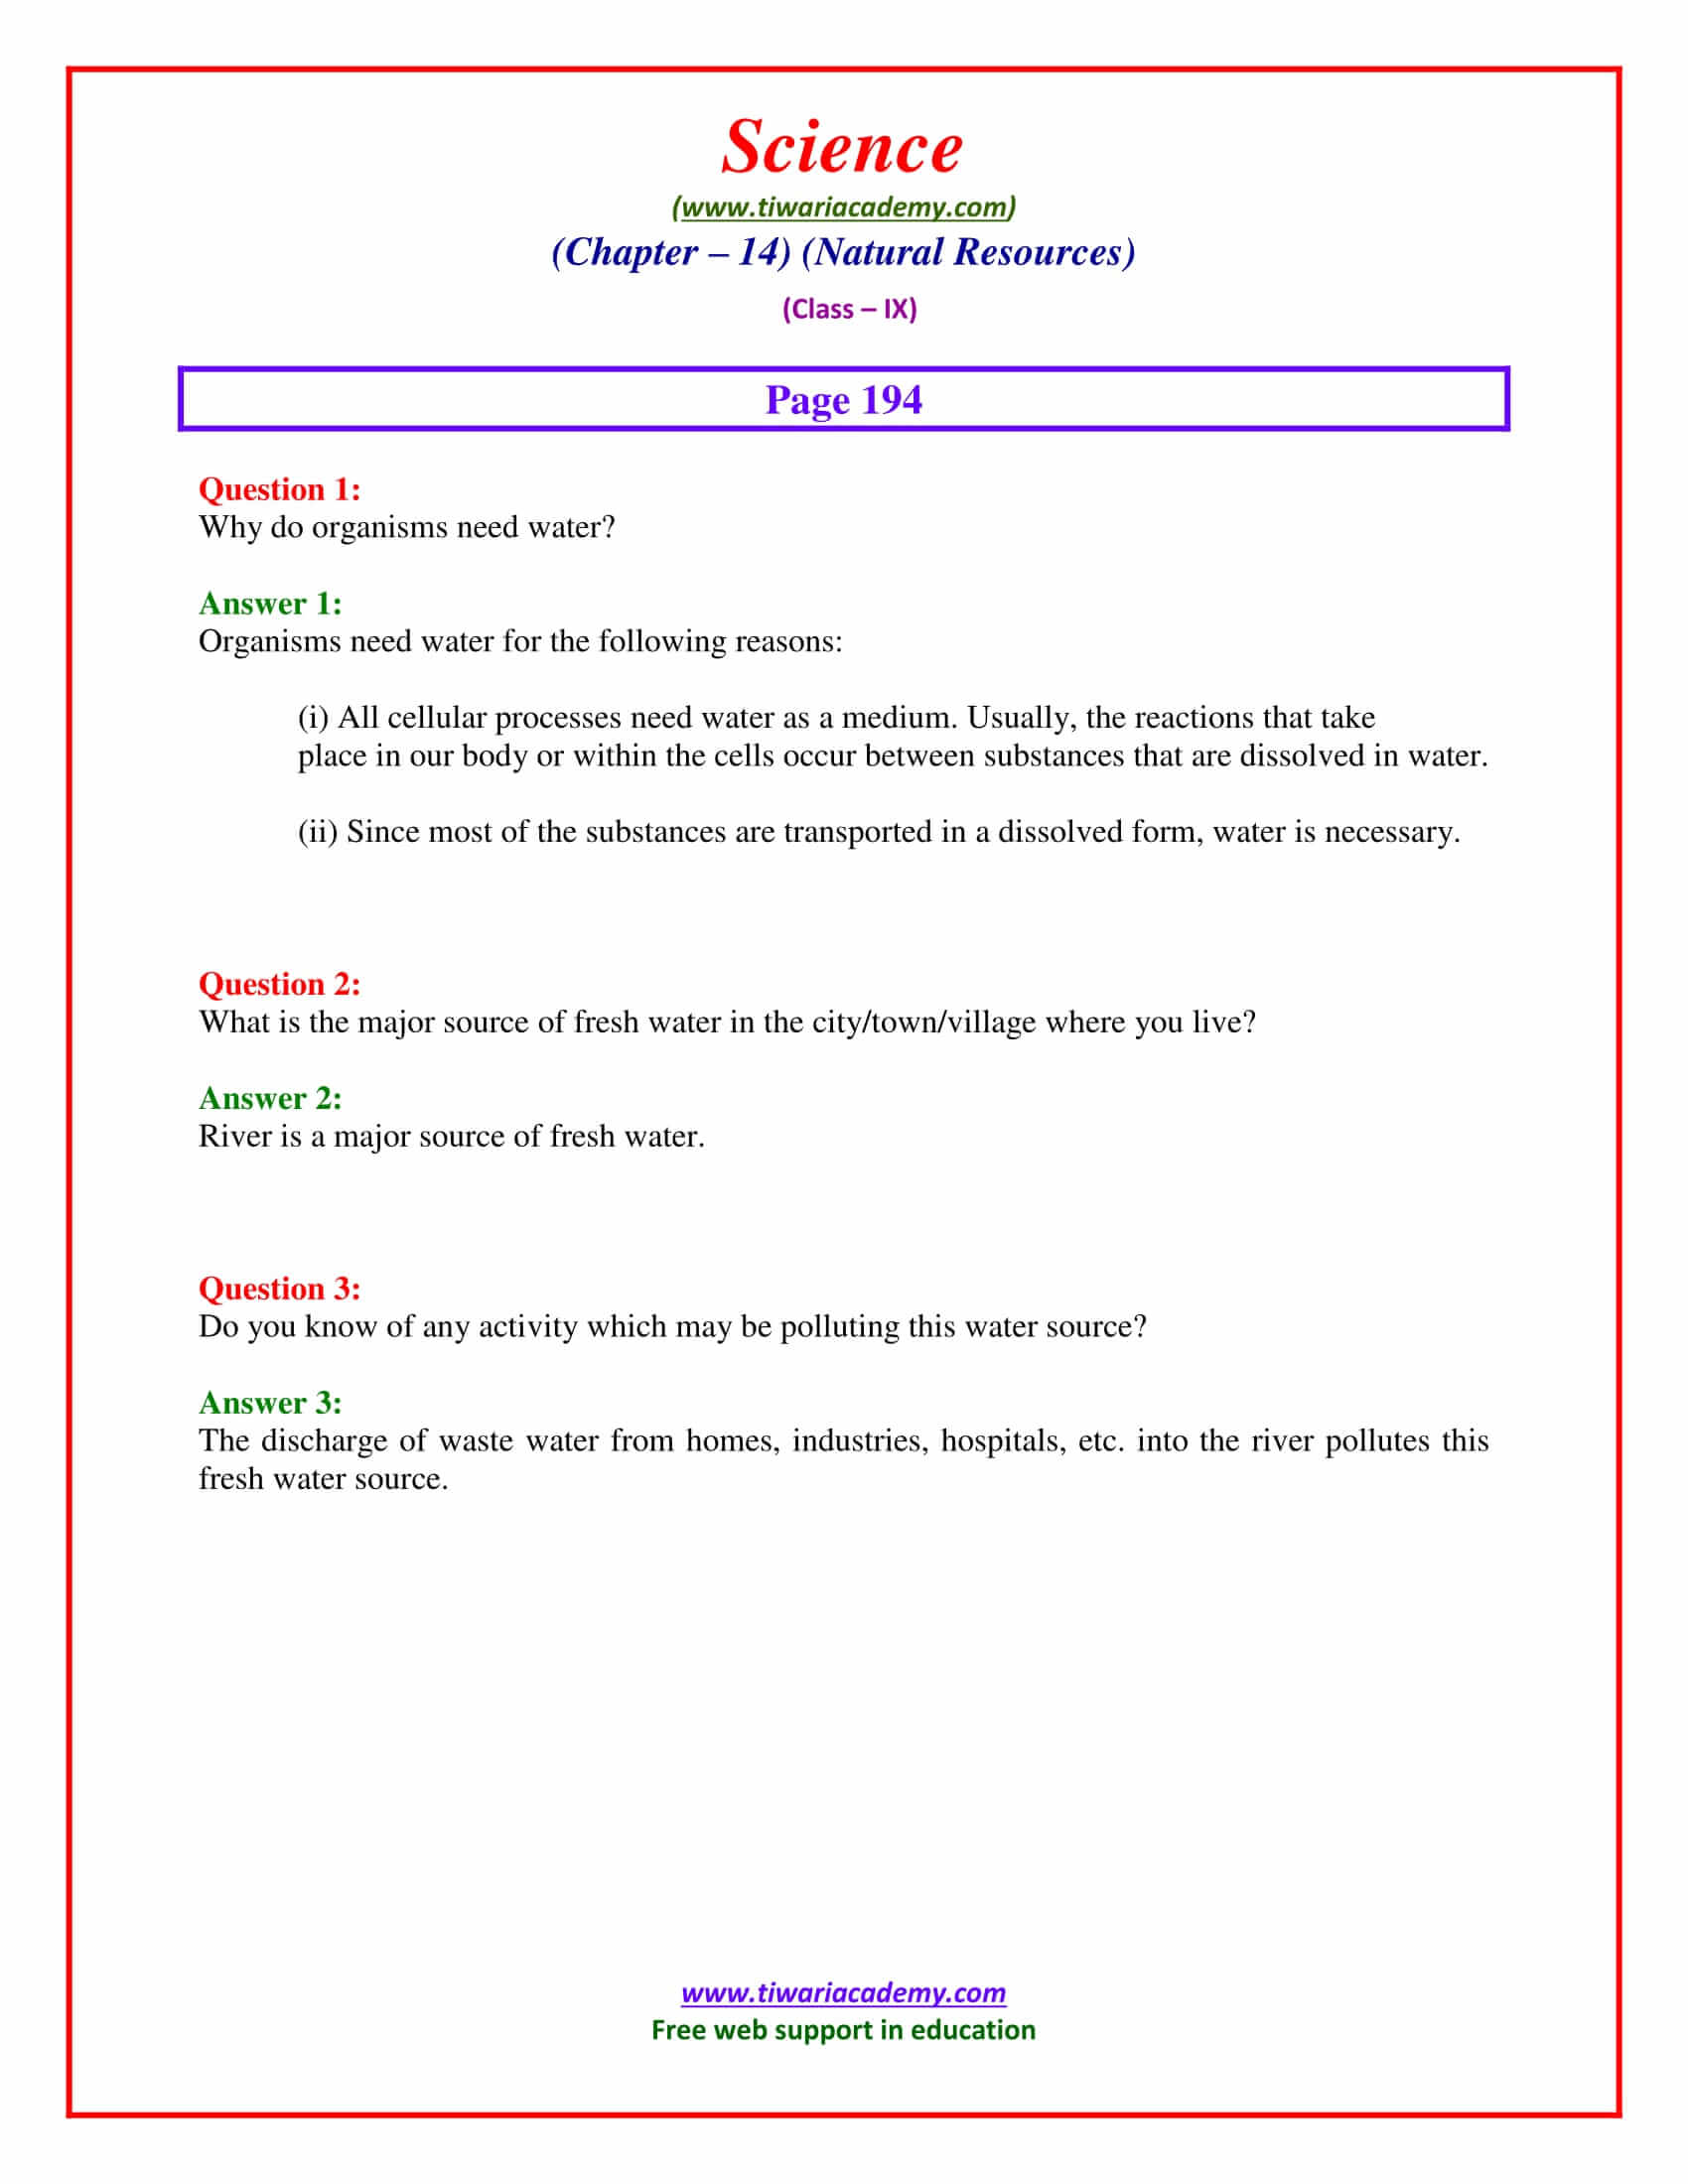 NCERT Solutions for Class 9 Science Chapter 14 Natural Resources Intext Questions Page 194